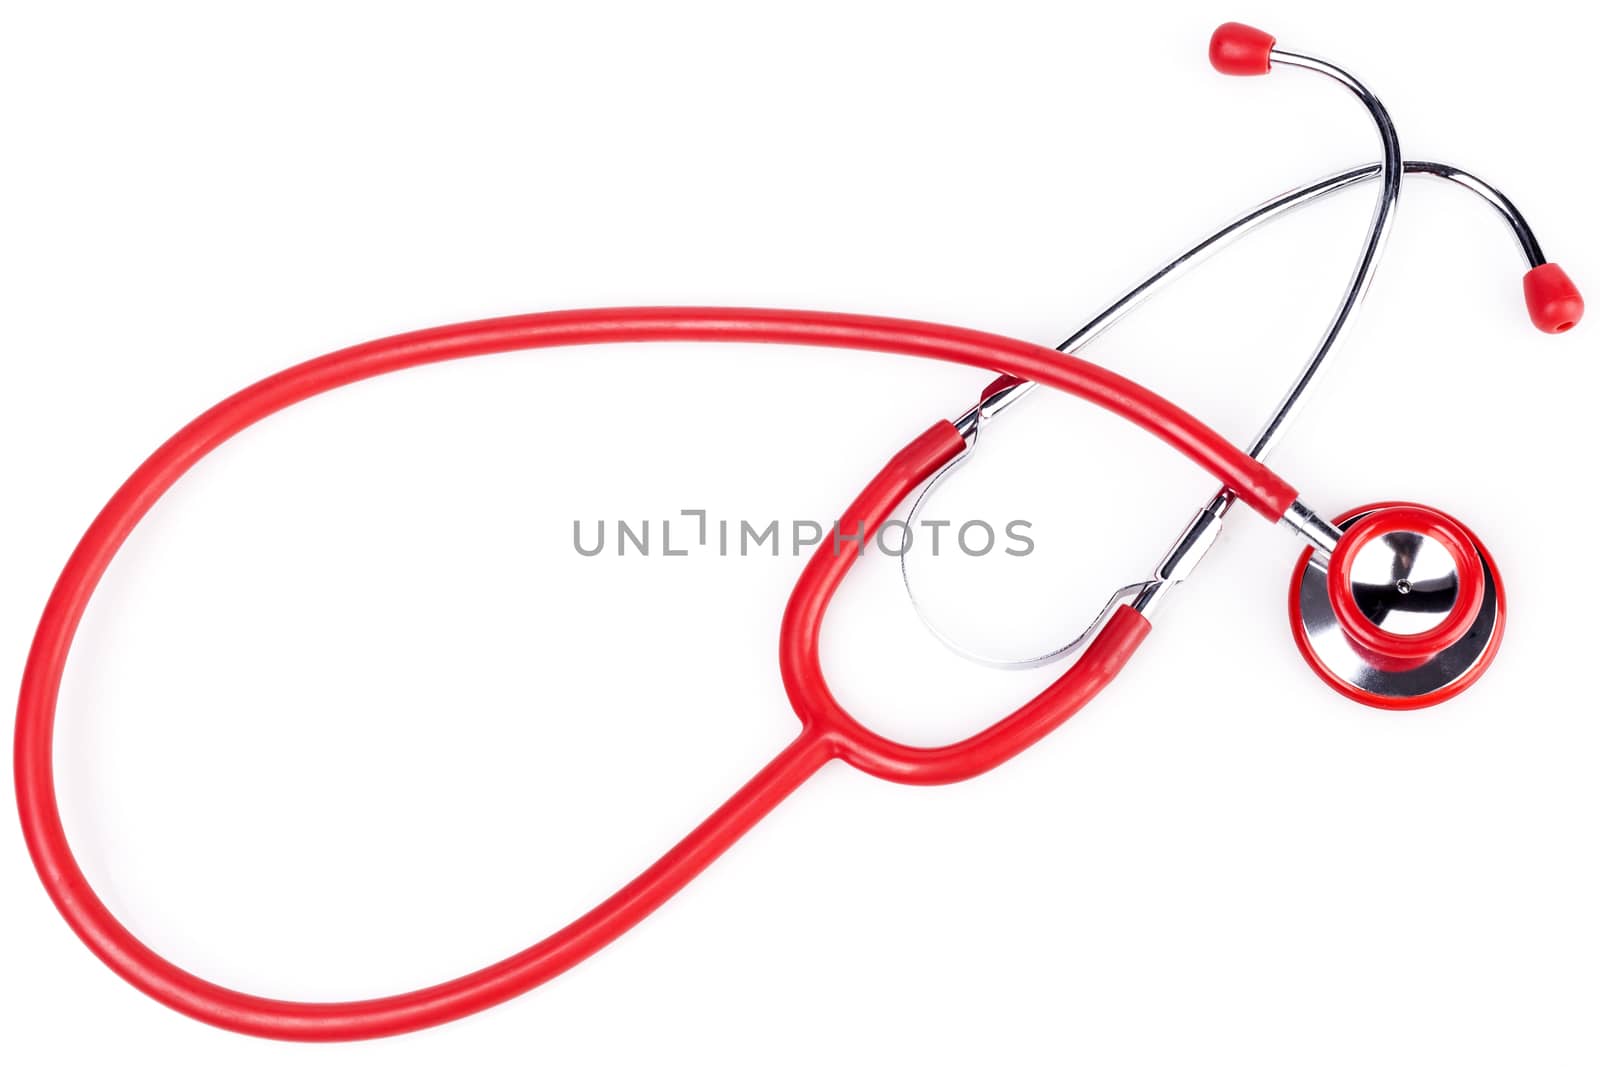 Red Stethoscope Close-up Isolated On White Background